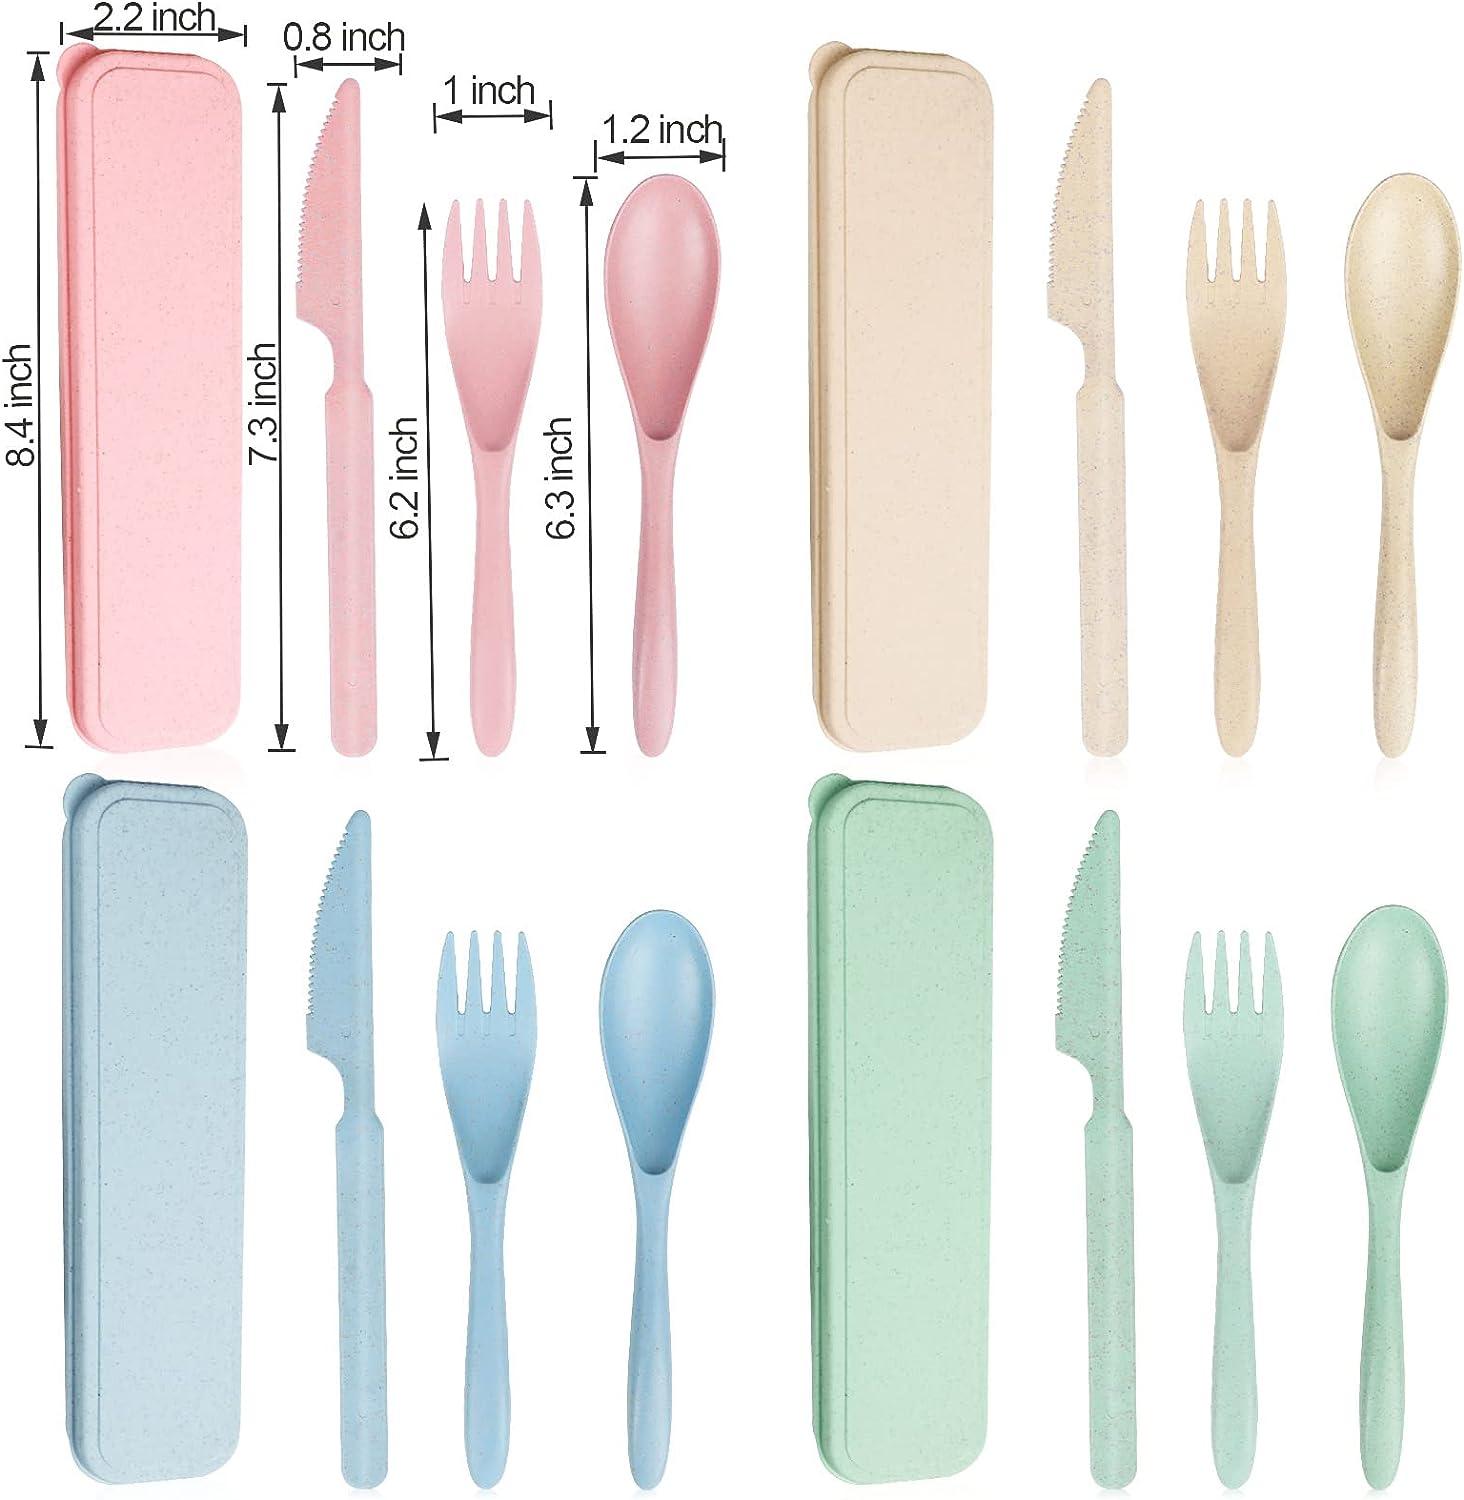  Reusable Travel Utensils Set with Case, 4 Sets Wheat Straw  Portable Knife Fork Spoons Tableware, Eco-Friendly Cutlery for Kids Adults  Travel Picnic Camping or Daily Use (Green, Beige, Pink, Blue) 